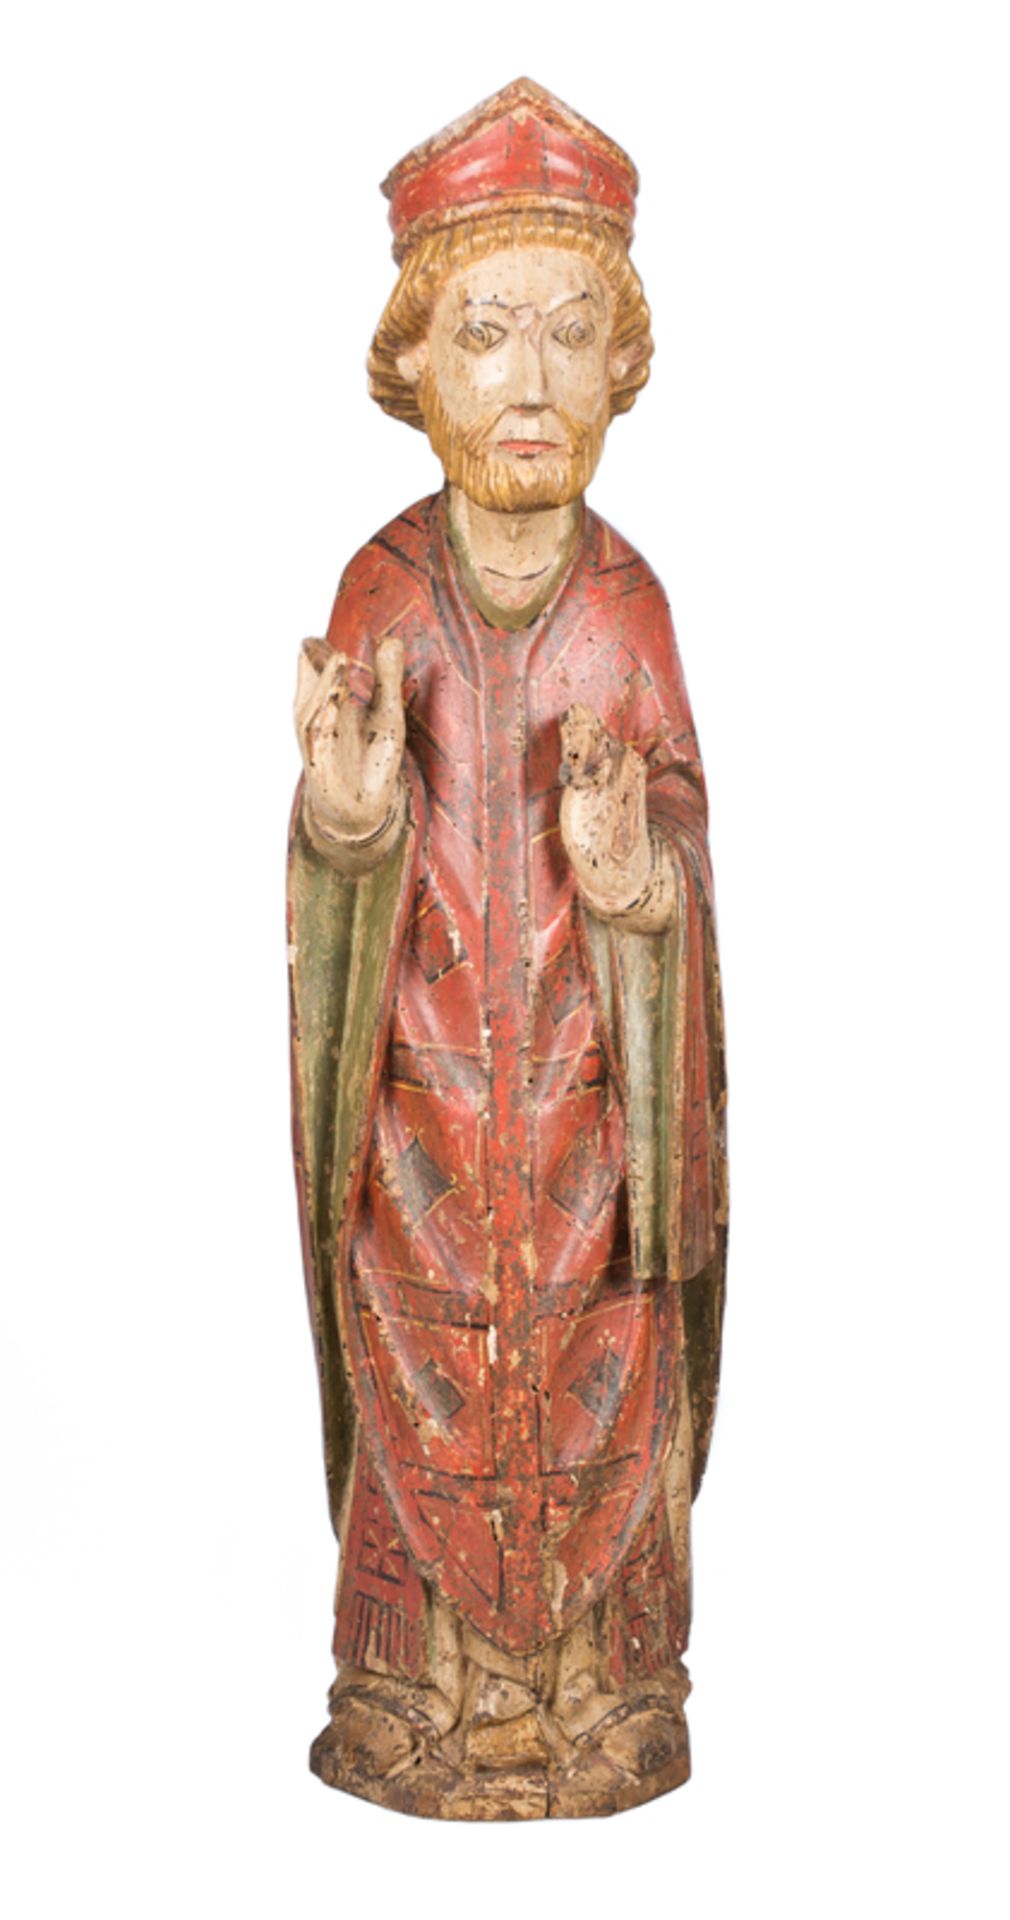 “Saint Augustine". Carved, gilded and polychromed sculpture. Romanesque. CIrca 1300.